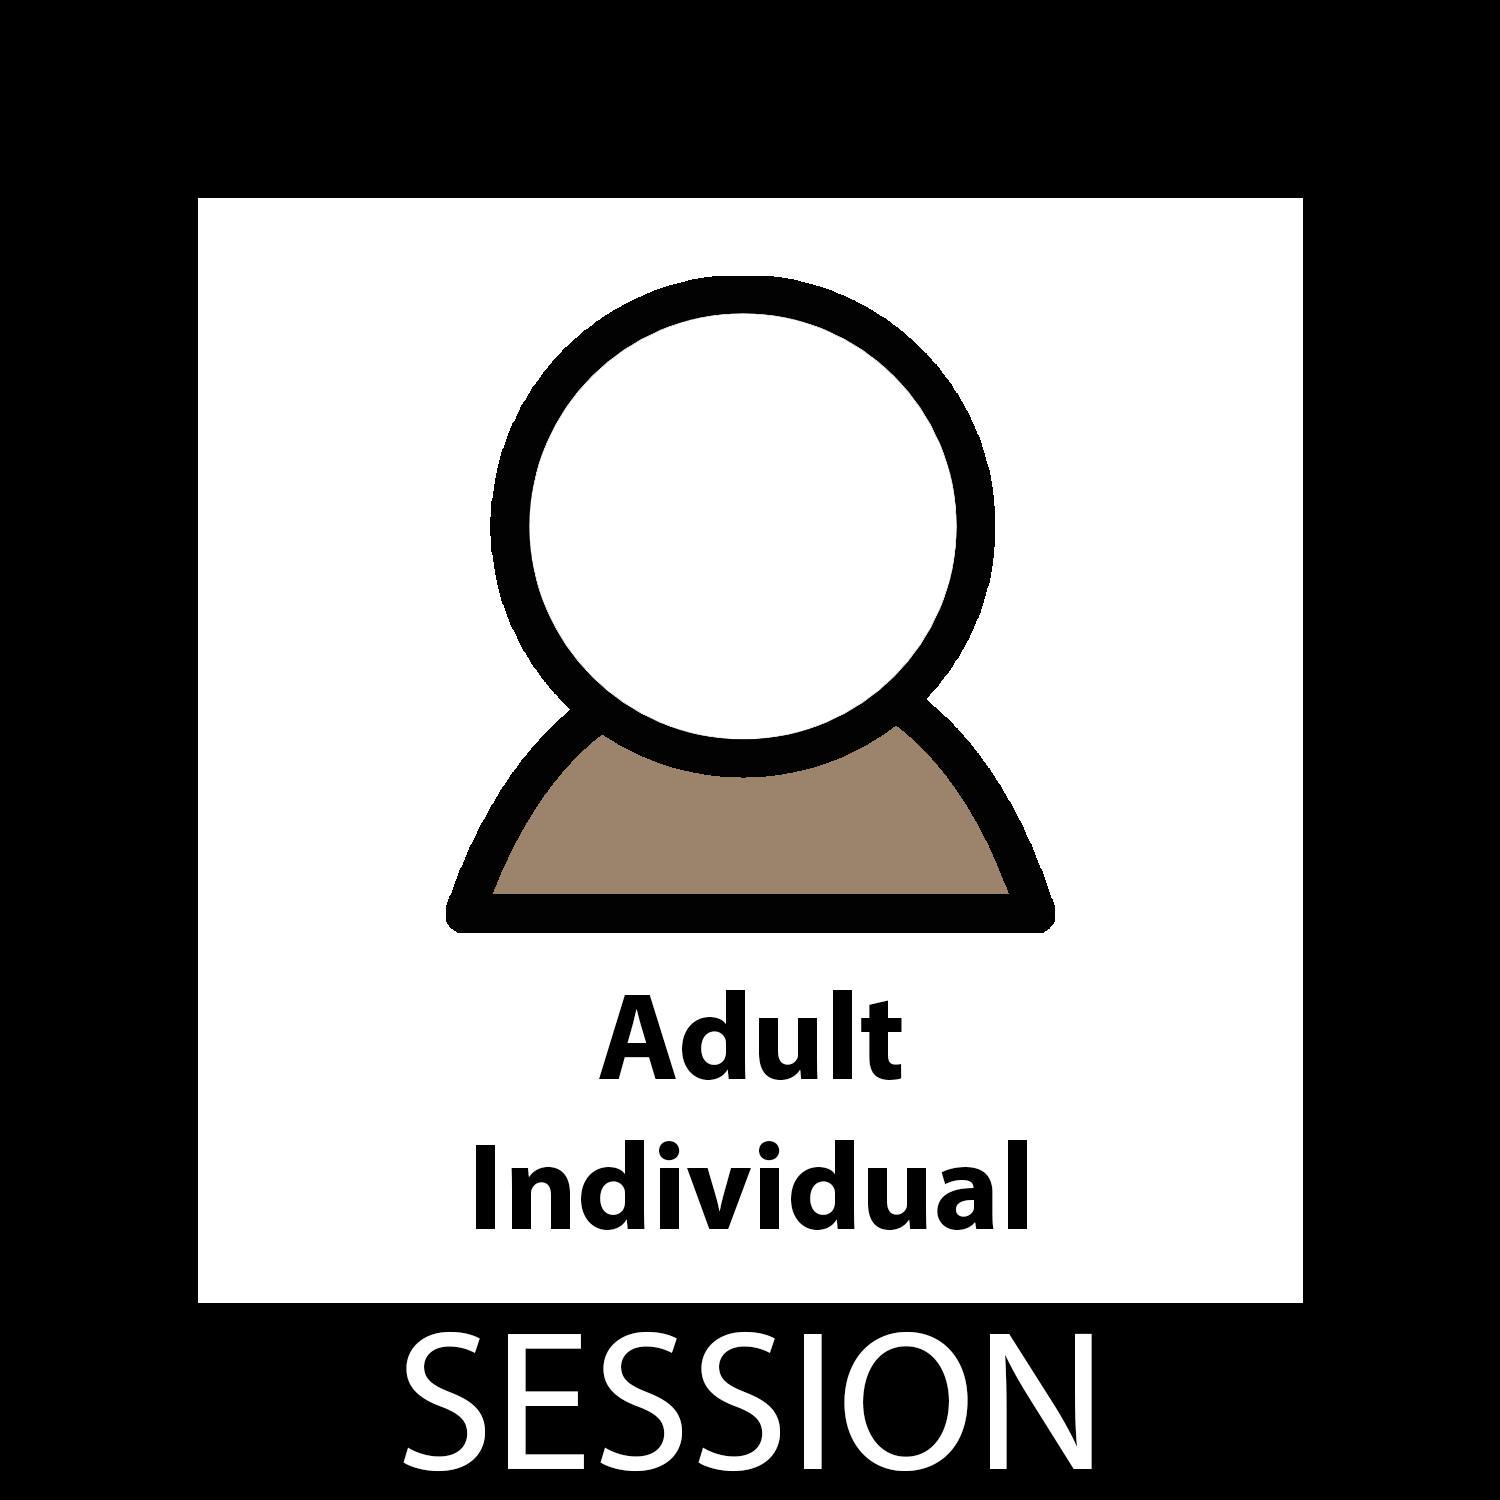 Adult Individual Session